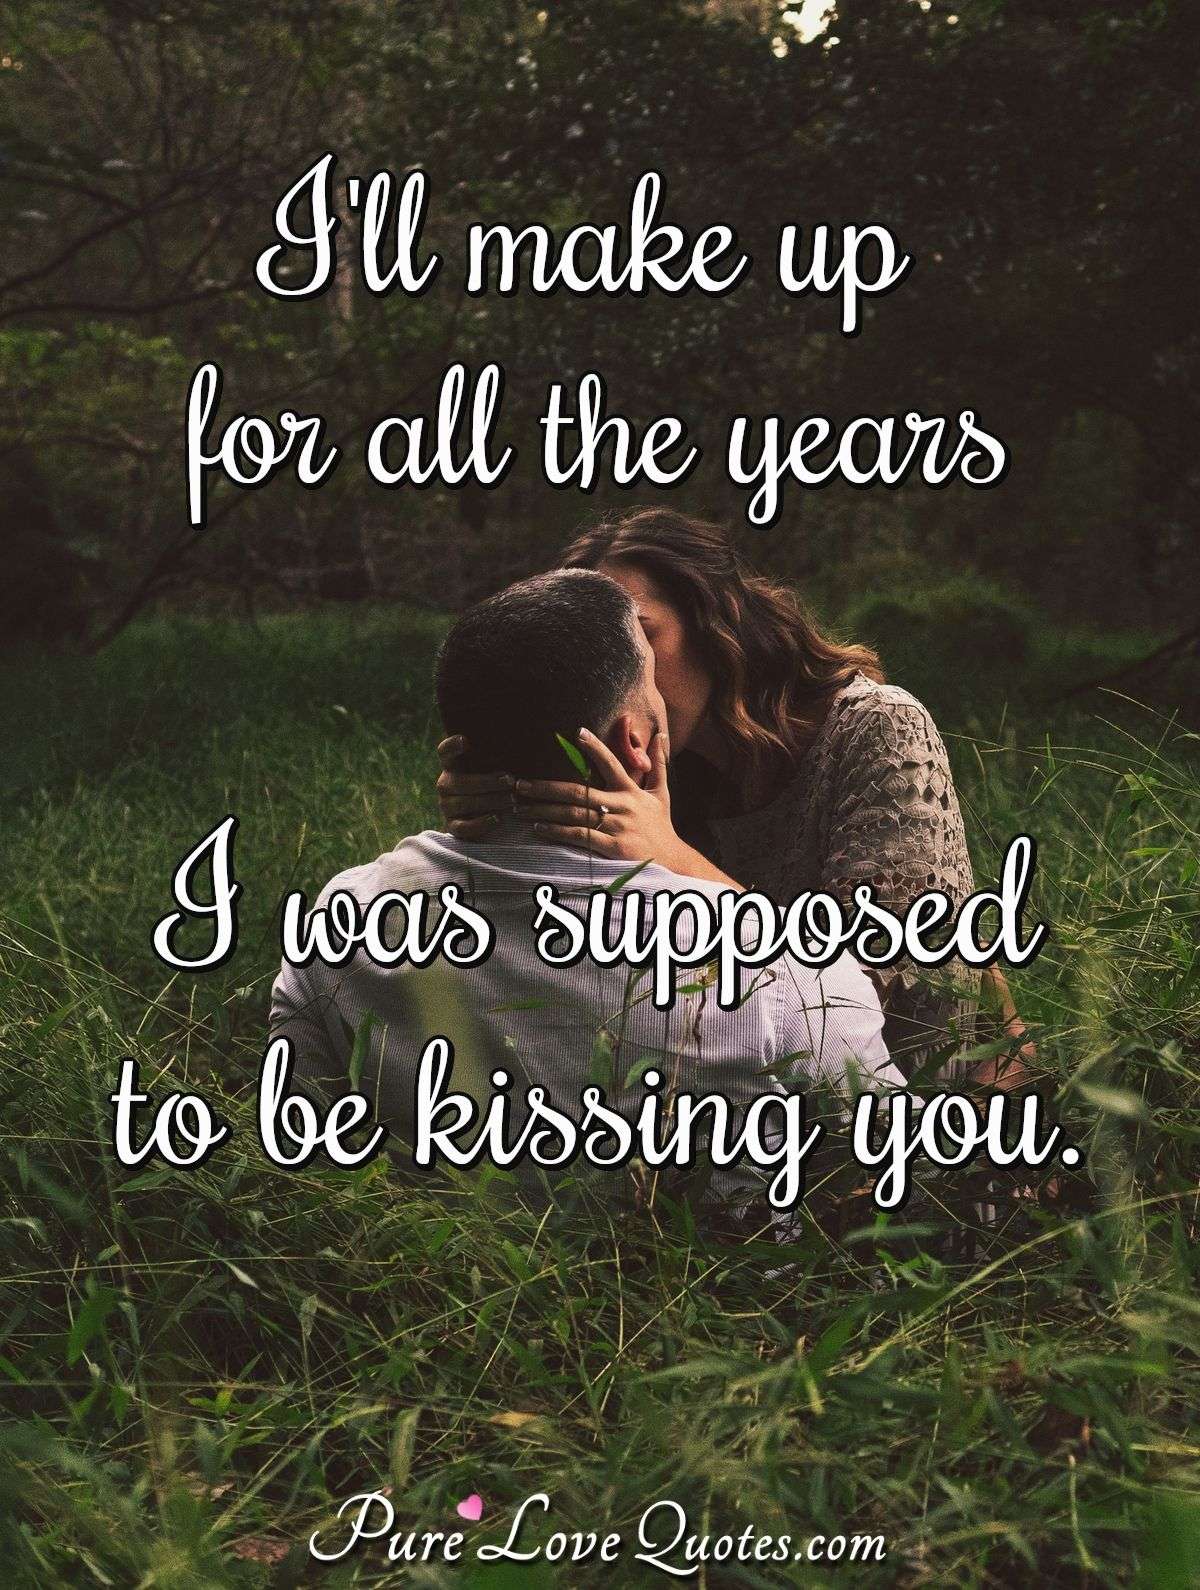 I'll make up for all the years I was supposed to be kissing you. - Anonymous